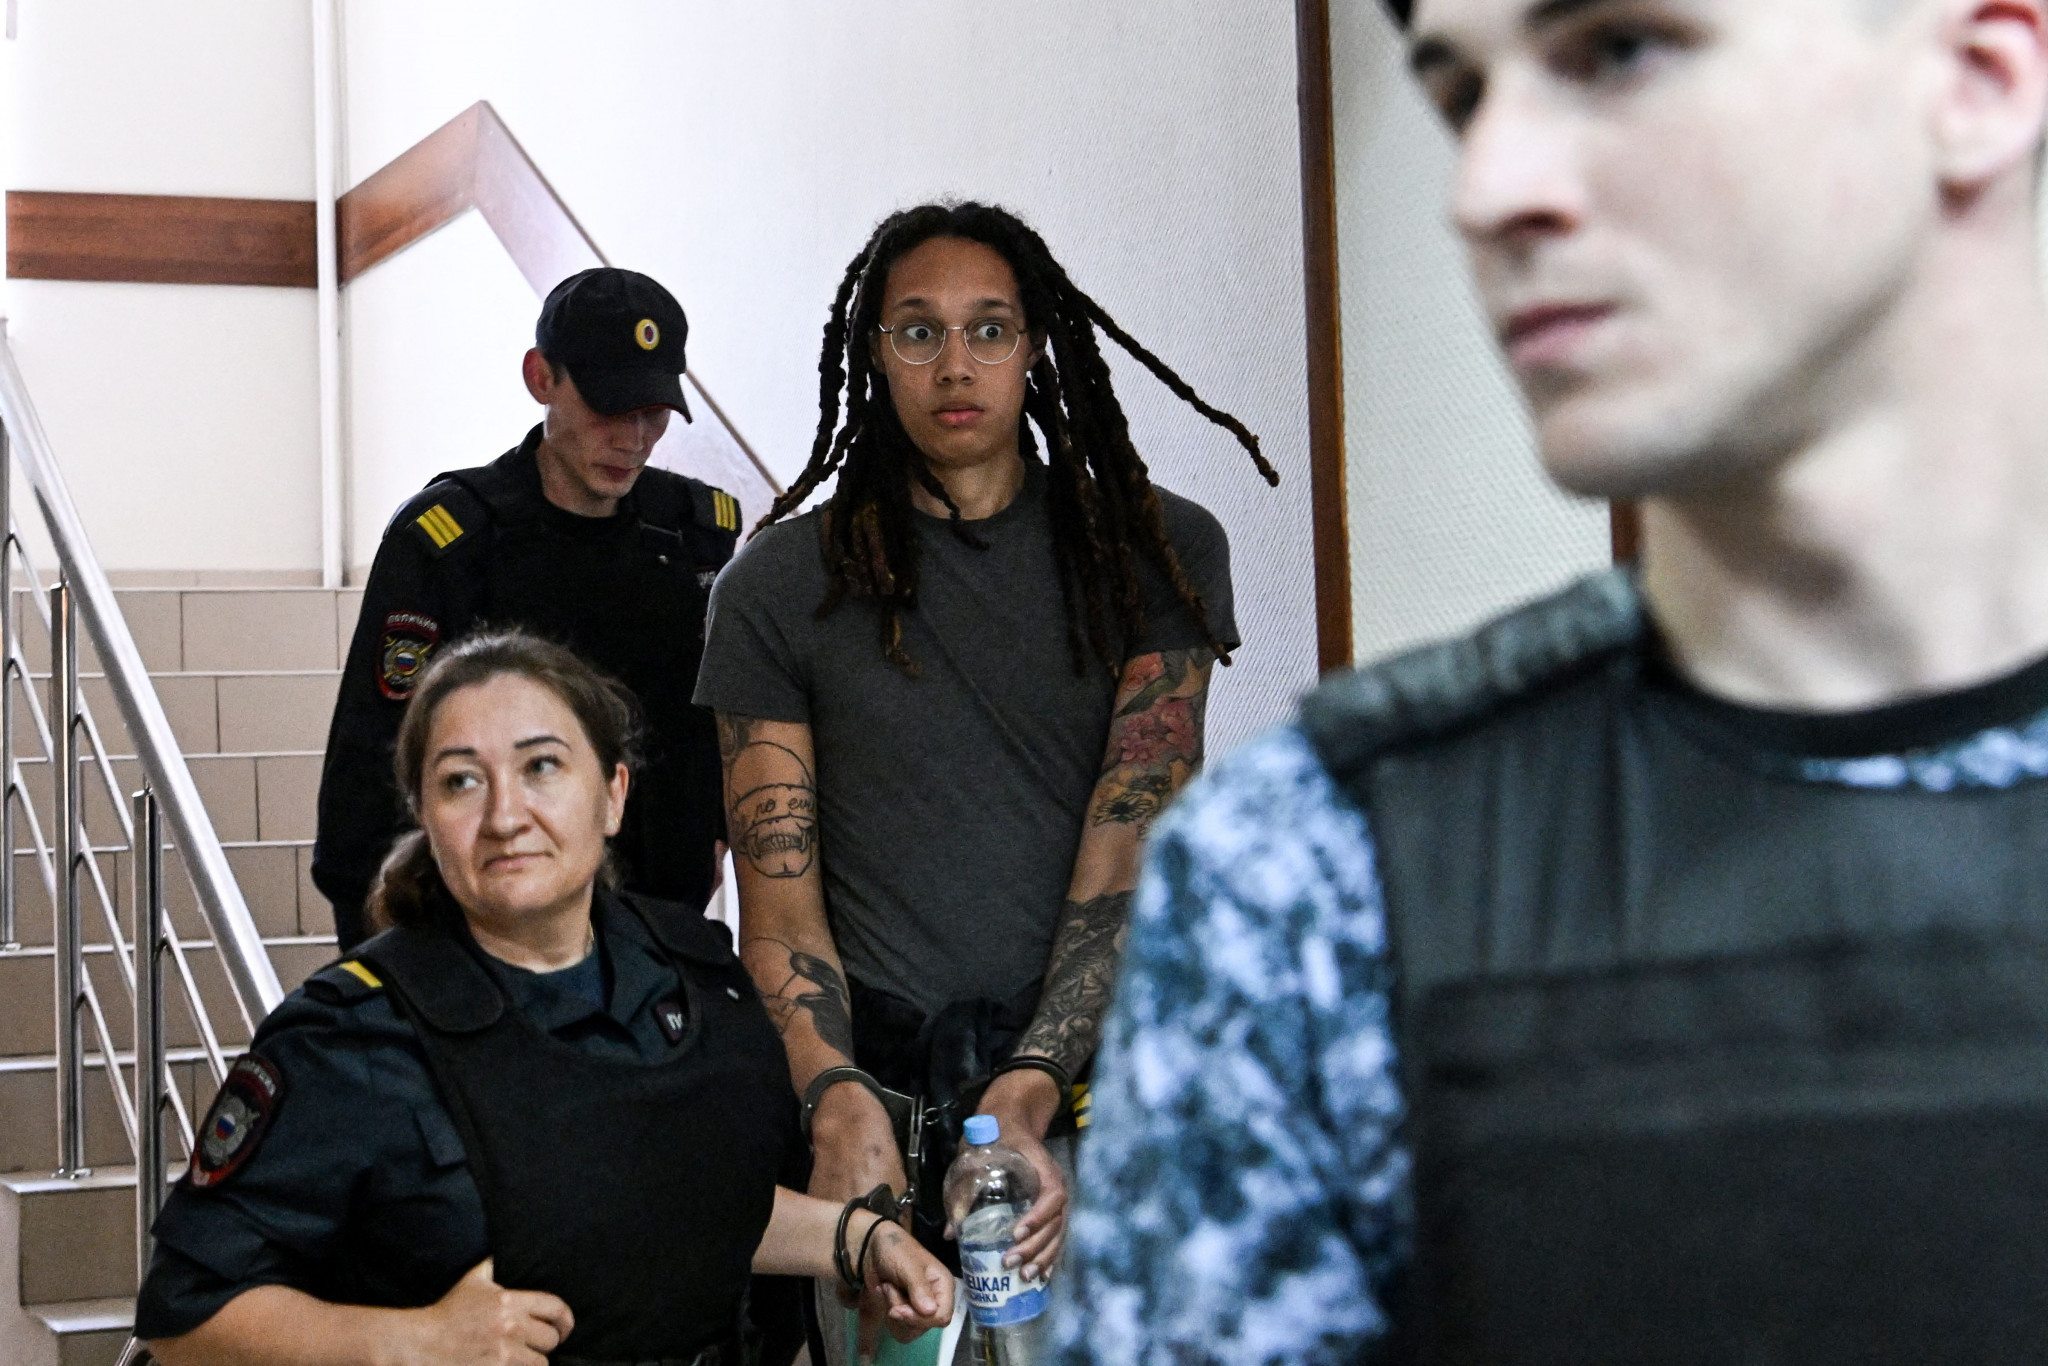 Brittney Griner had been entering Russia to begin a new season for UMMC Ekaterinburg, who she has played for since 2014, when she was arrested on drugs charges ©Getty Images